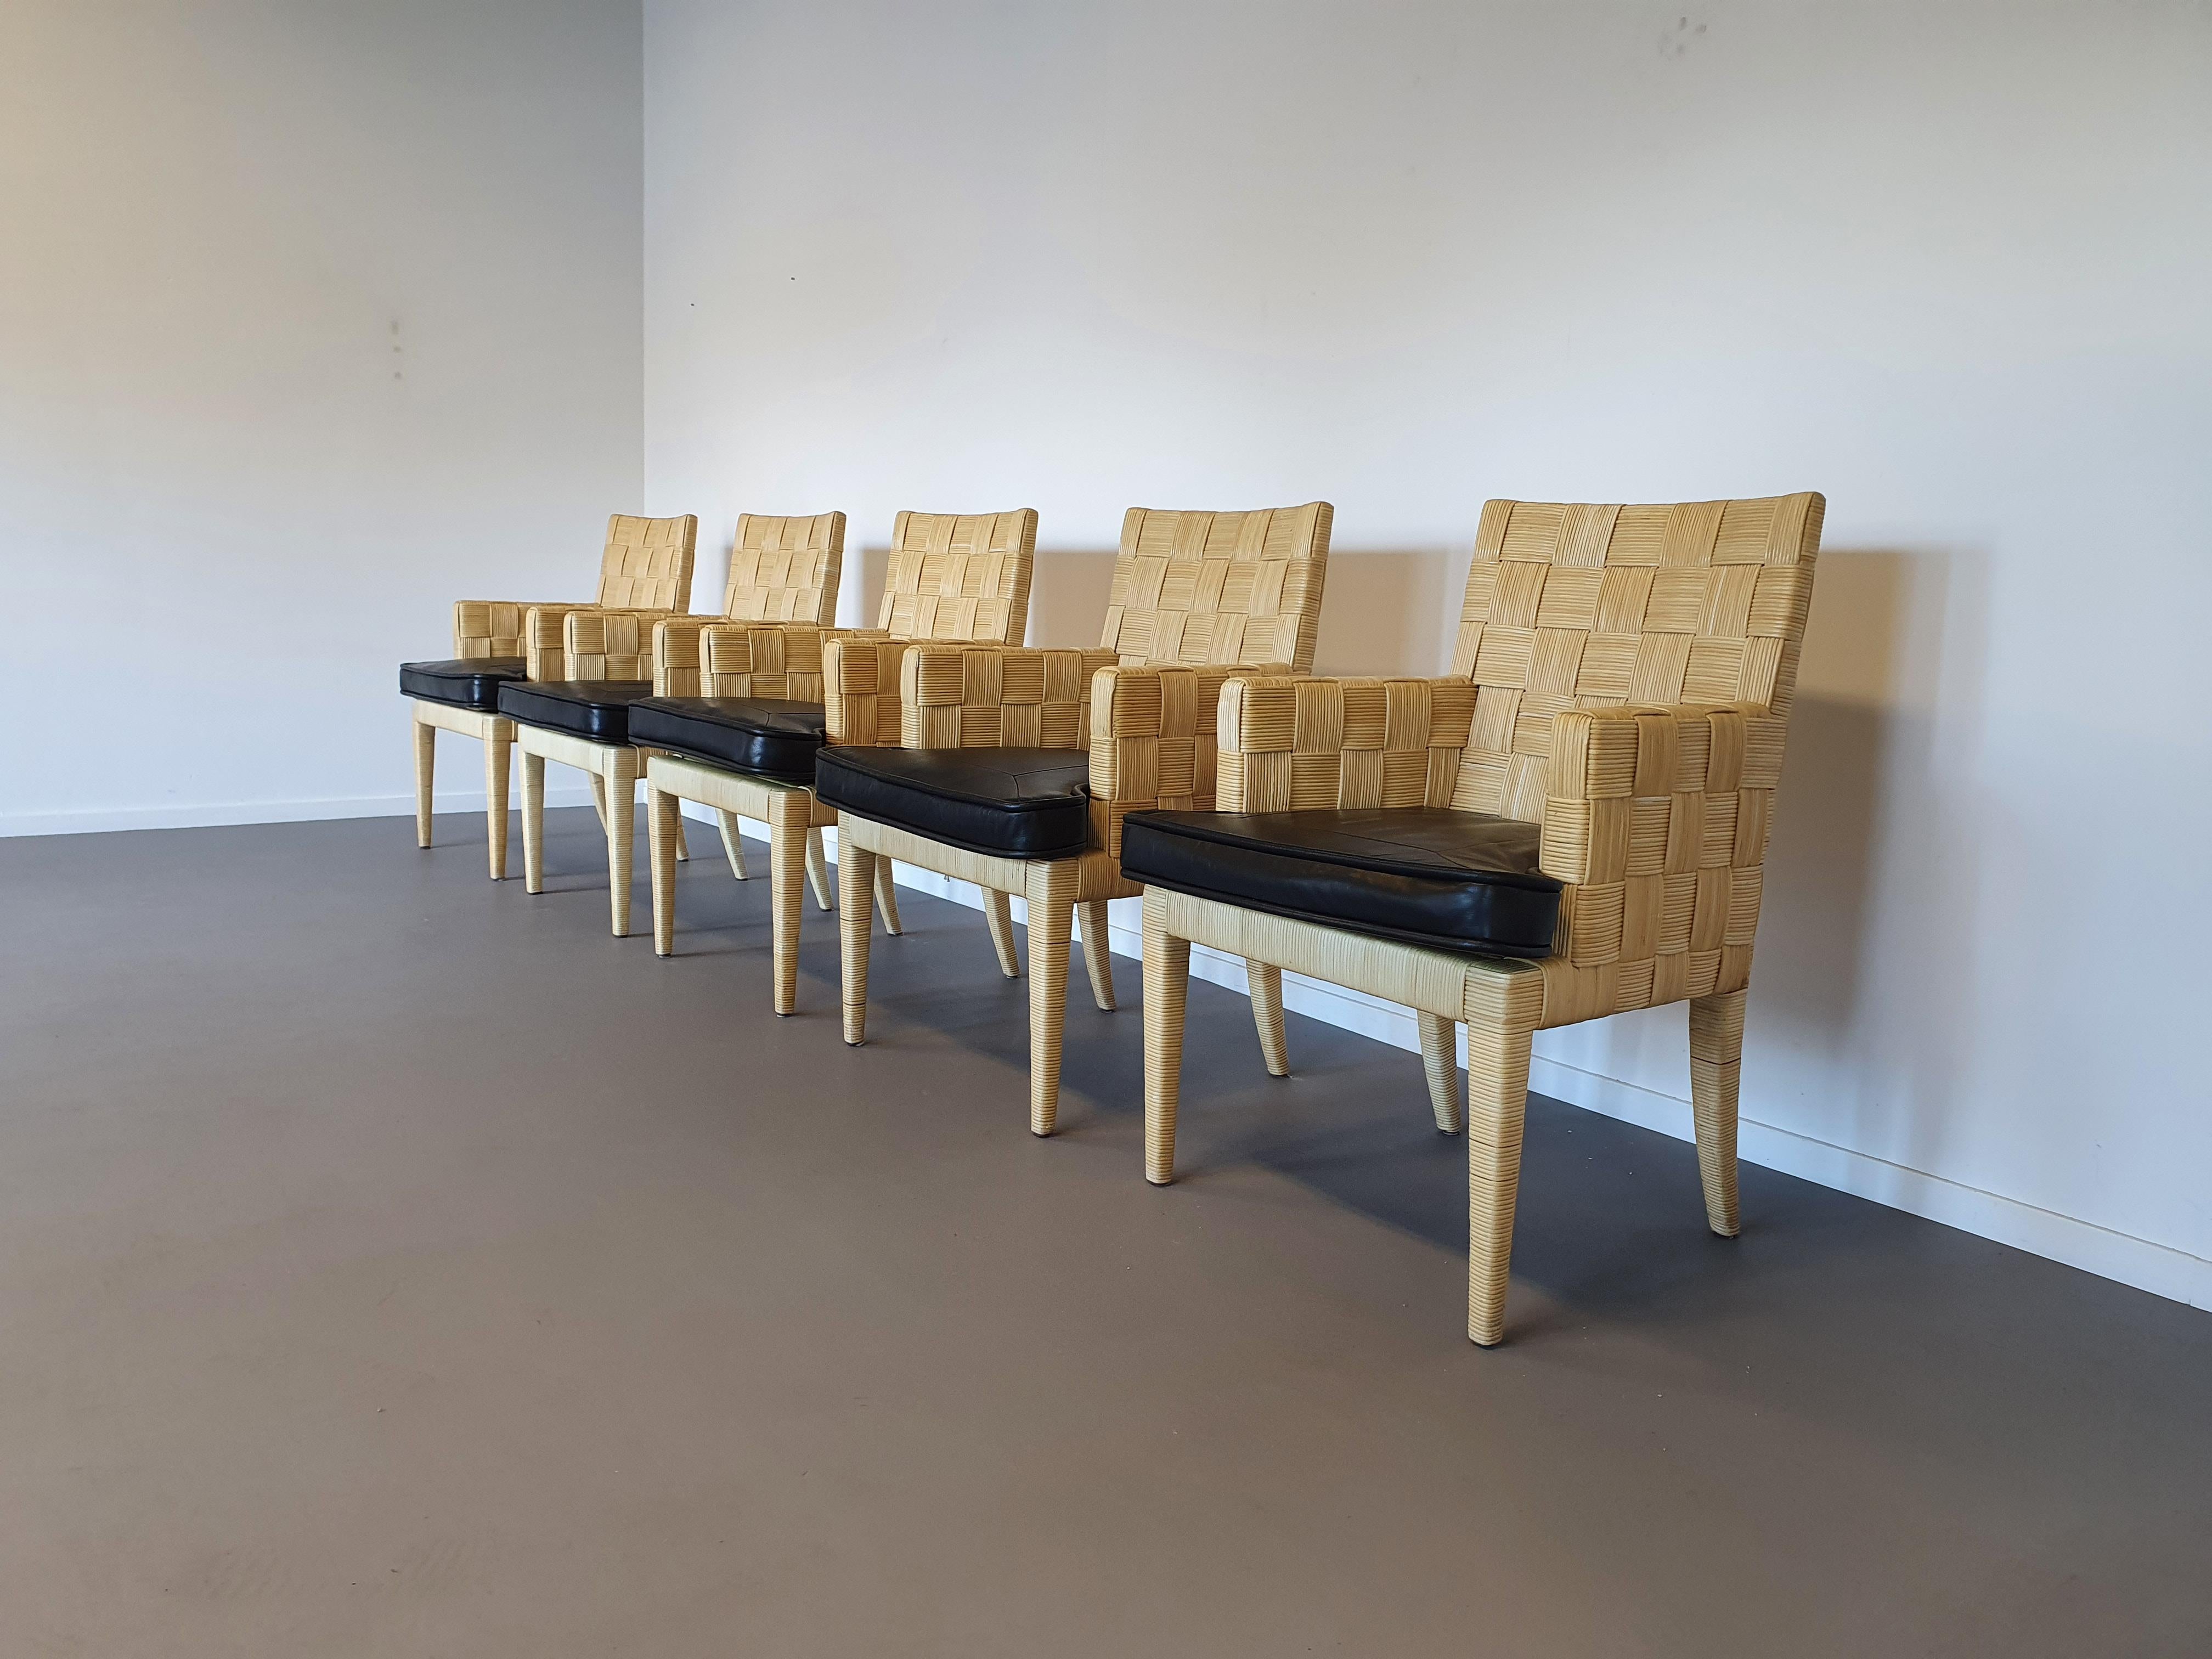 Donghia Block Island chairs 1990s with leather seats. 5 x armrests, 2 x without by John Hutton. The original Leather cushions has been painted over professionaly
